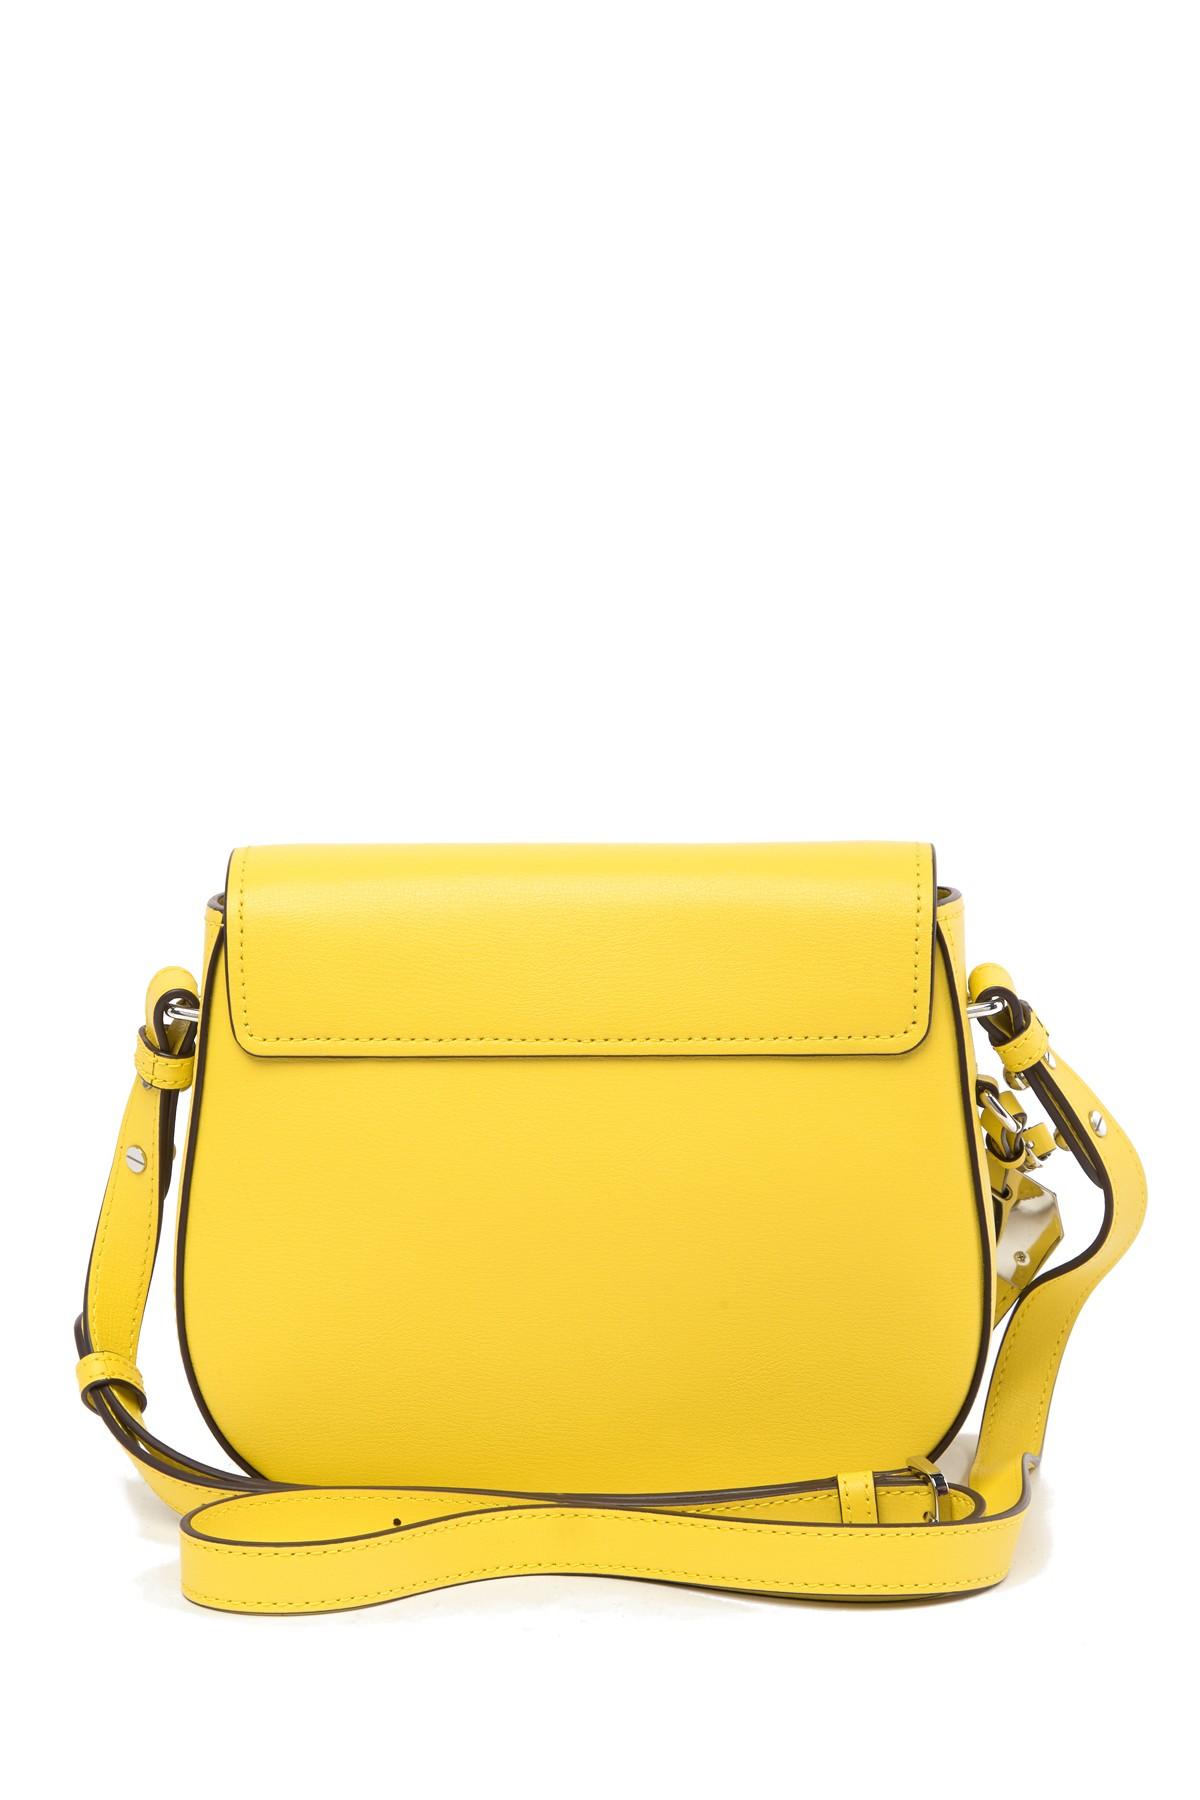 Lyst - Marc Jacobs Mini Rider Leather Crossbody Bag in Yellow